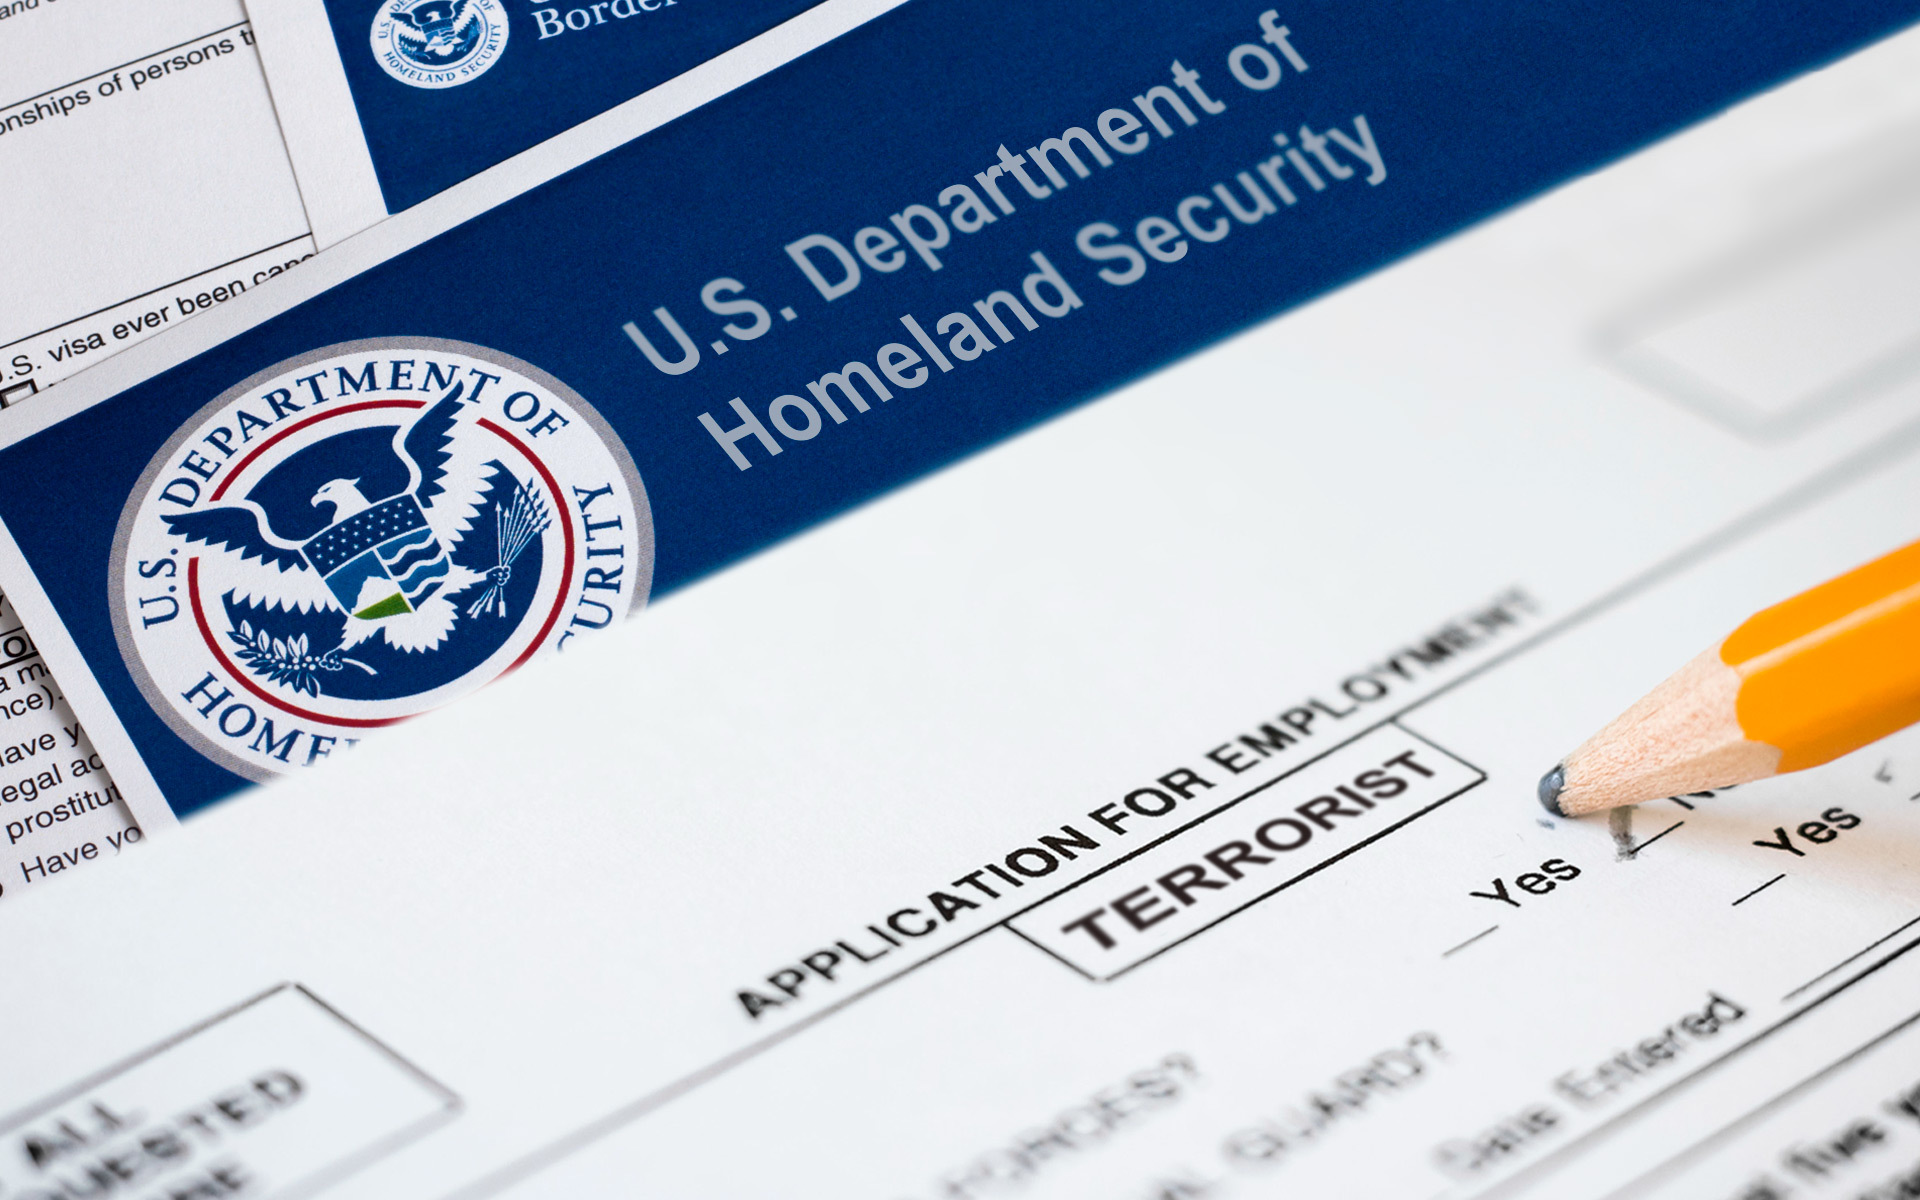 DHS inspector general: ‘Effectiveness of the Visa Security Program cannot be determined’